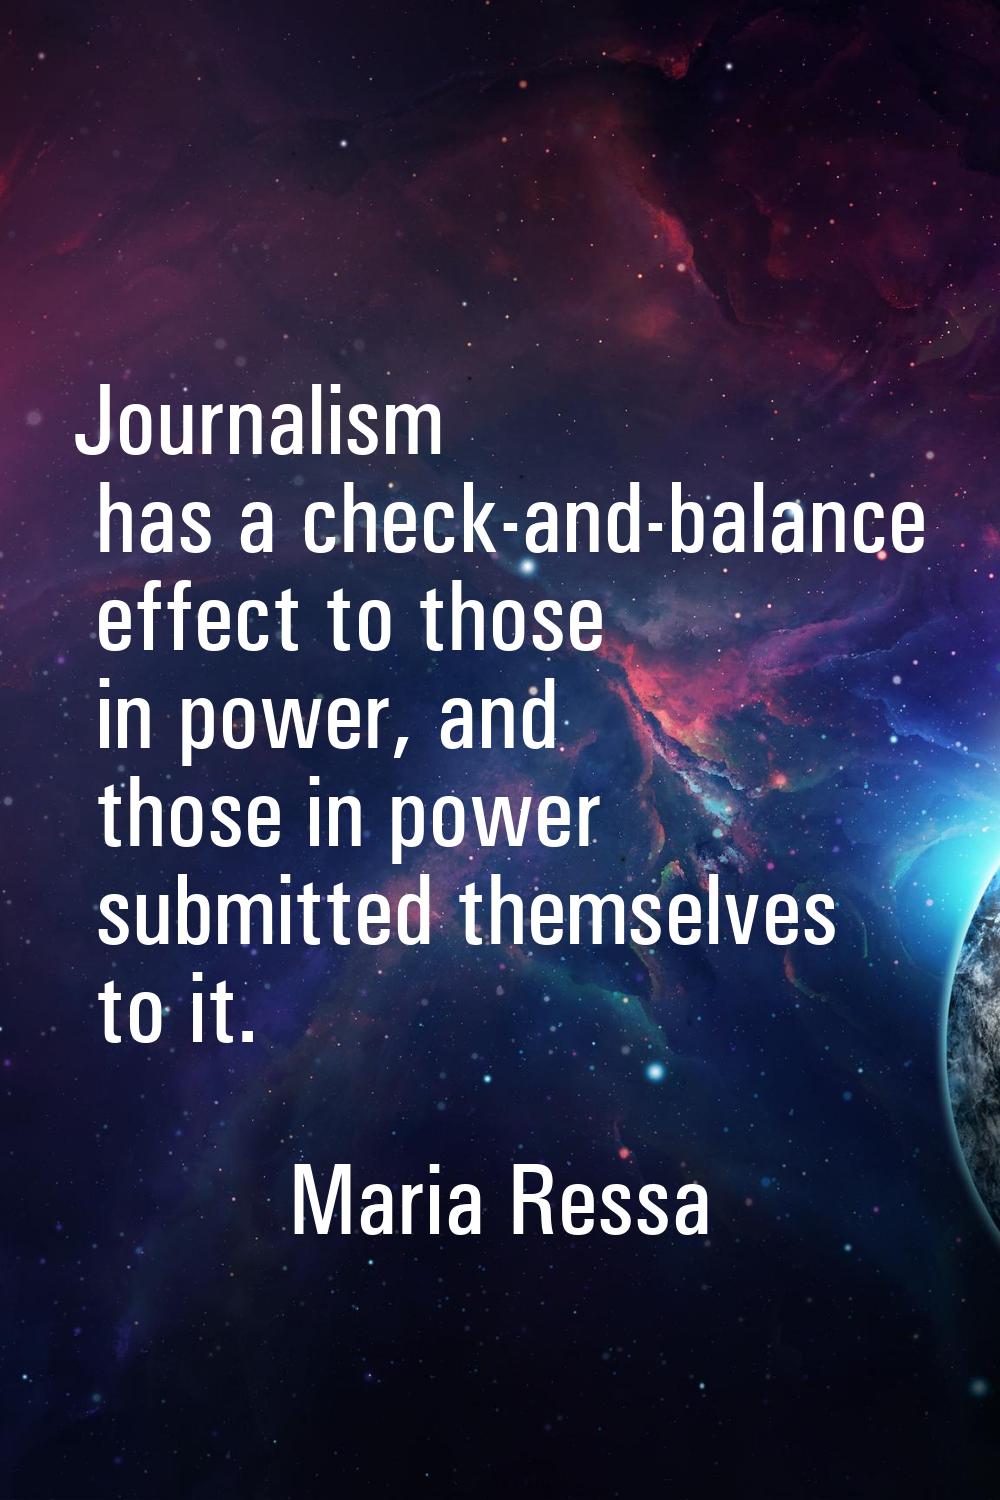 Journalism has a check-and-balance effect to those in power, and those in power submitted themselve